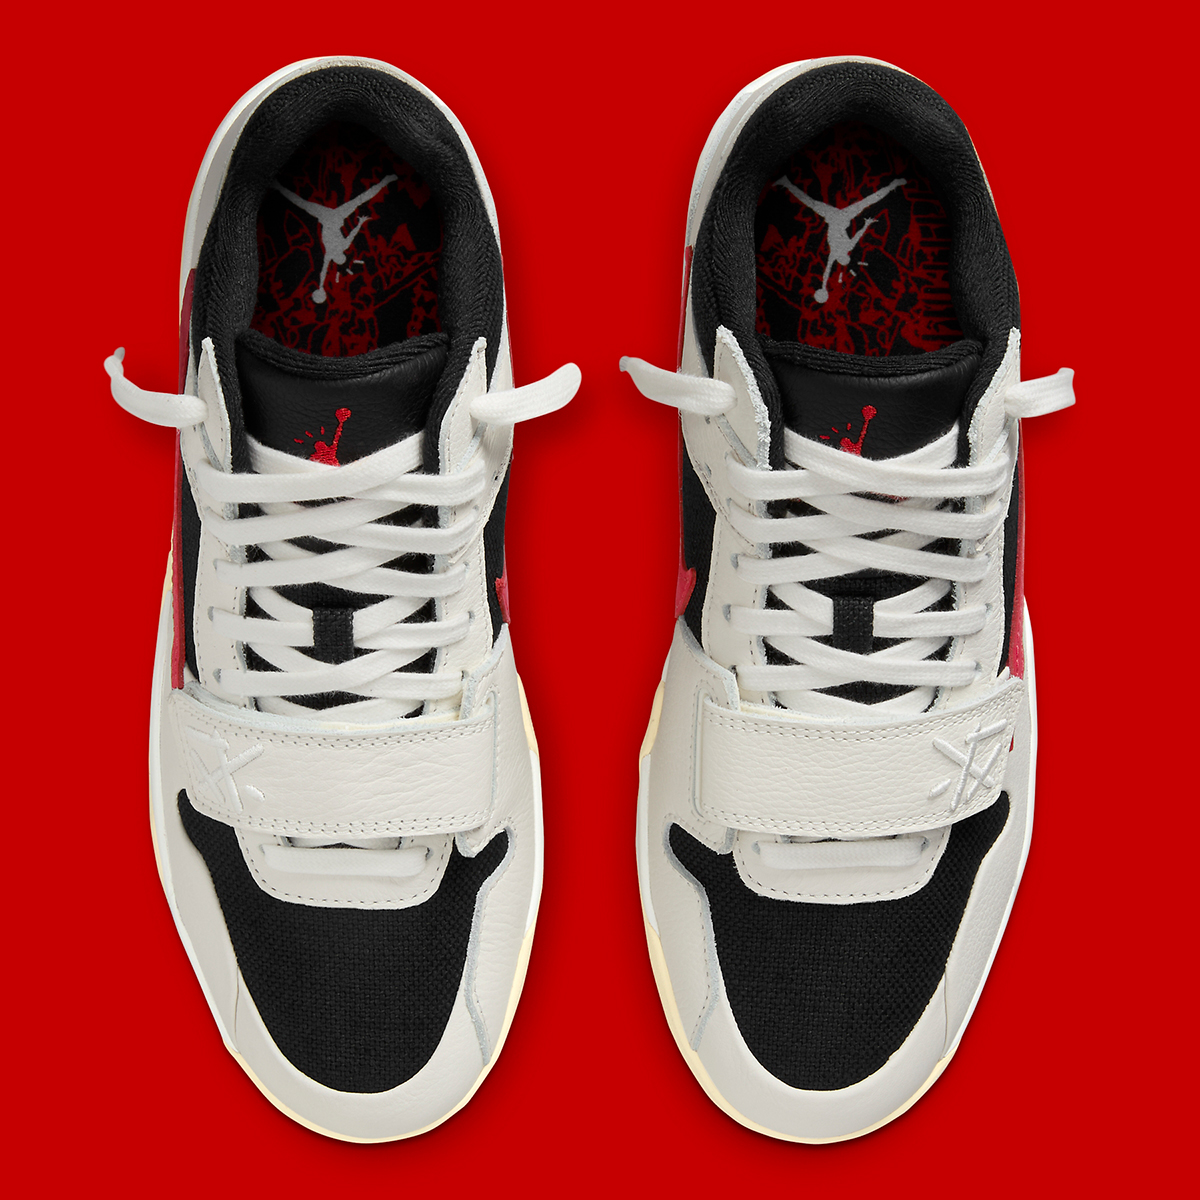 Travis Scott Dropping this weekend is a brand new Jordan retro for the grade schoolers Tr Sail University Red Black Muslin Fz8117 101 8